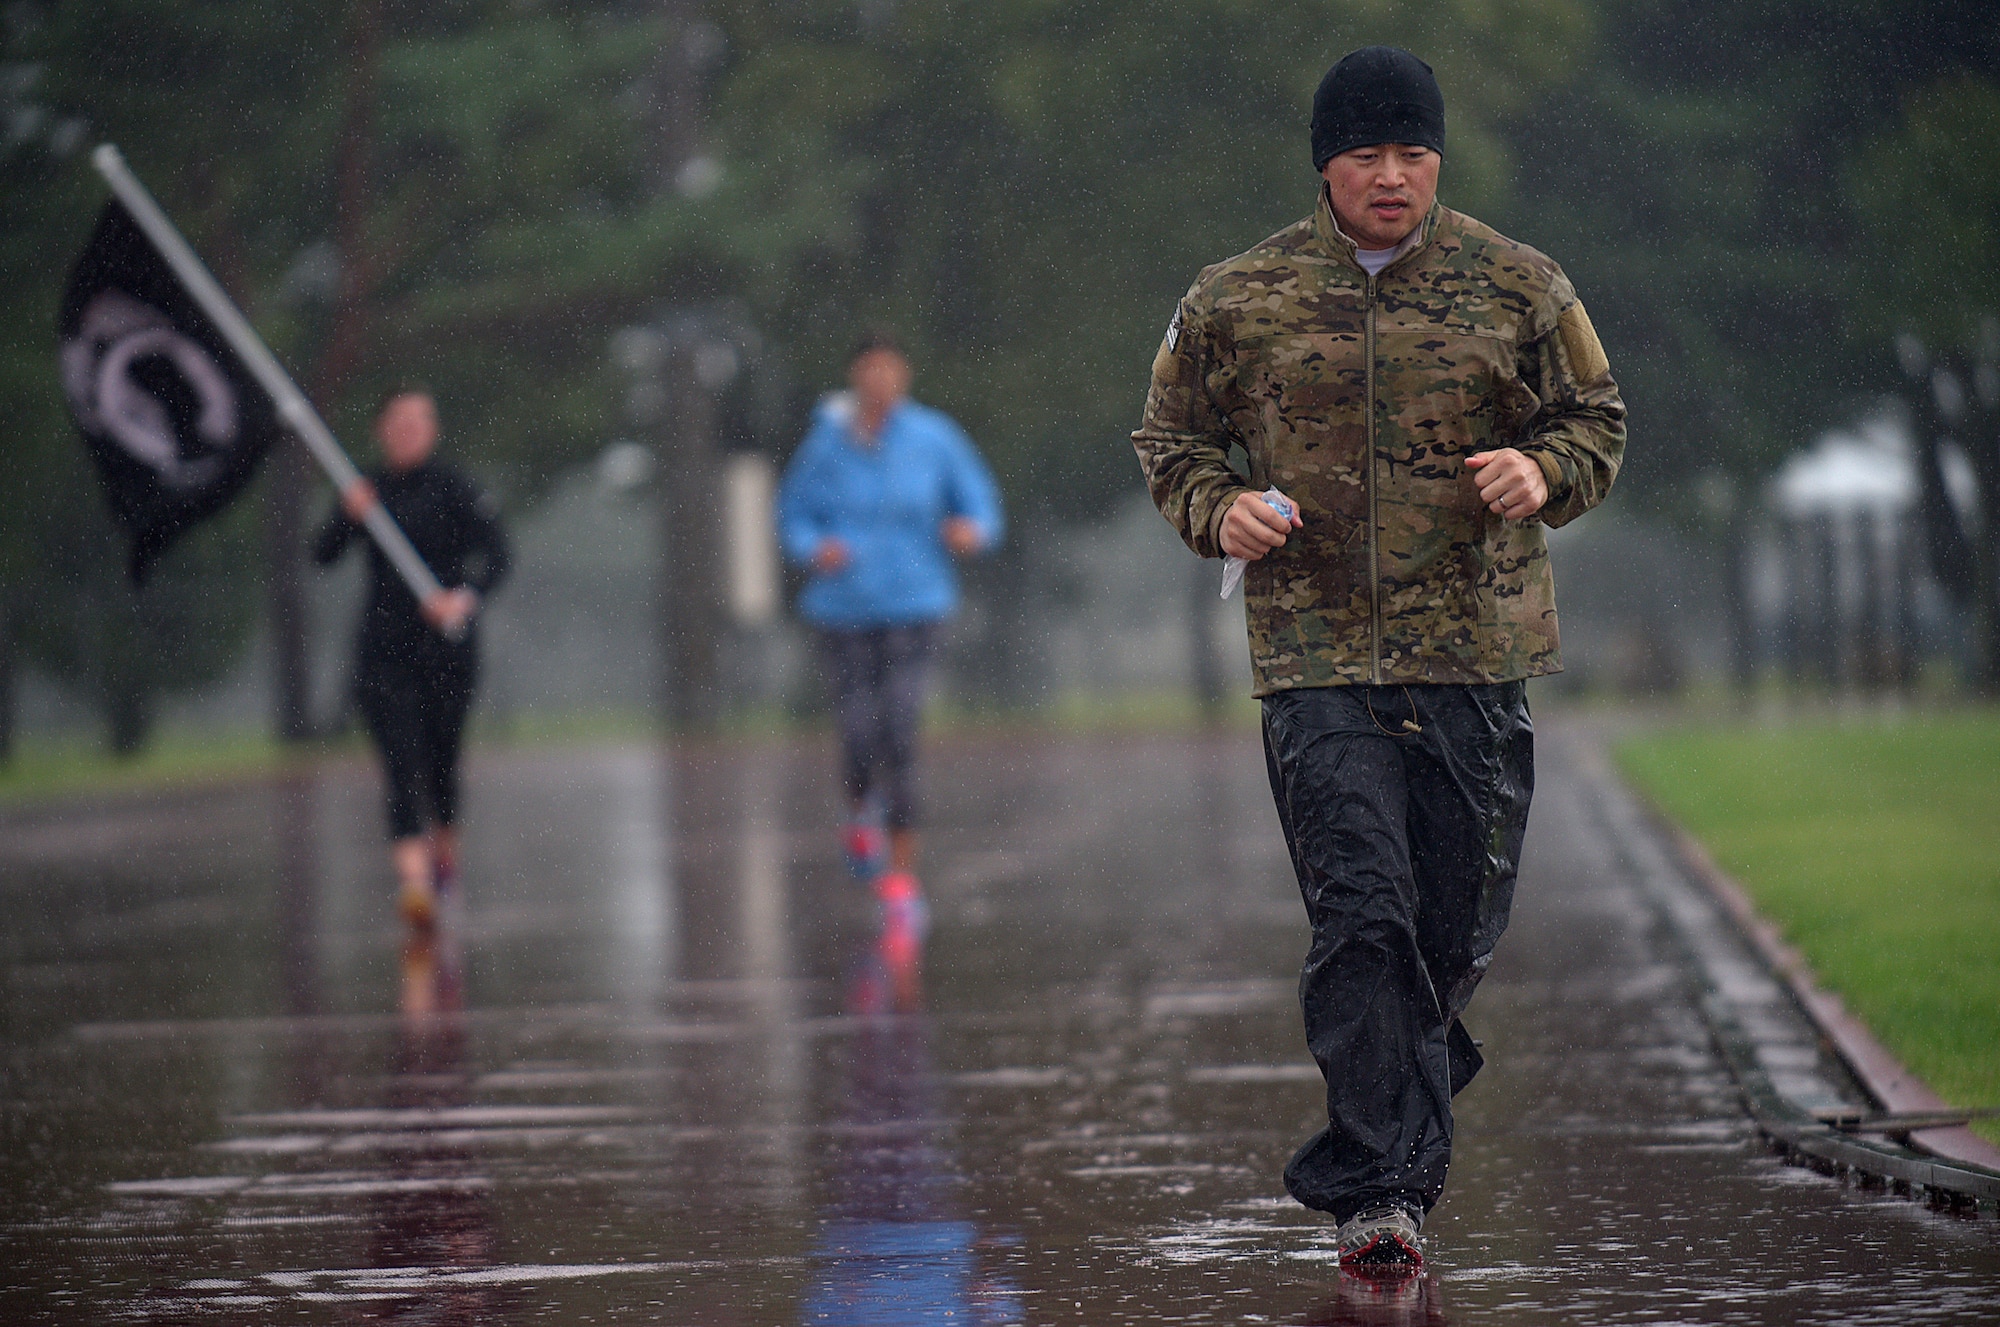 Capt. Michael Gruber, the 35th Communications Squadron director of operations, reaches his 65th mile while running in a downpour of rain Sept. 18, 2015, at Misawa Air Base, Japan. Beginning his ultramarathon at 5 p.m. on Sept. 17, 2015, Gruber’s goal was to run 100 miles in a span of 24 hours at the local high school track. (U.S. Air Force photo/Senior Airman Jose L. Hernandez-Domitilo)